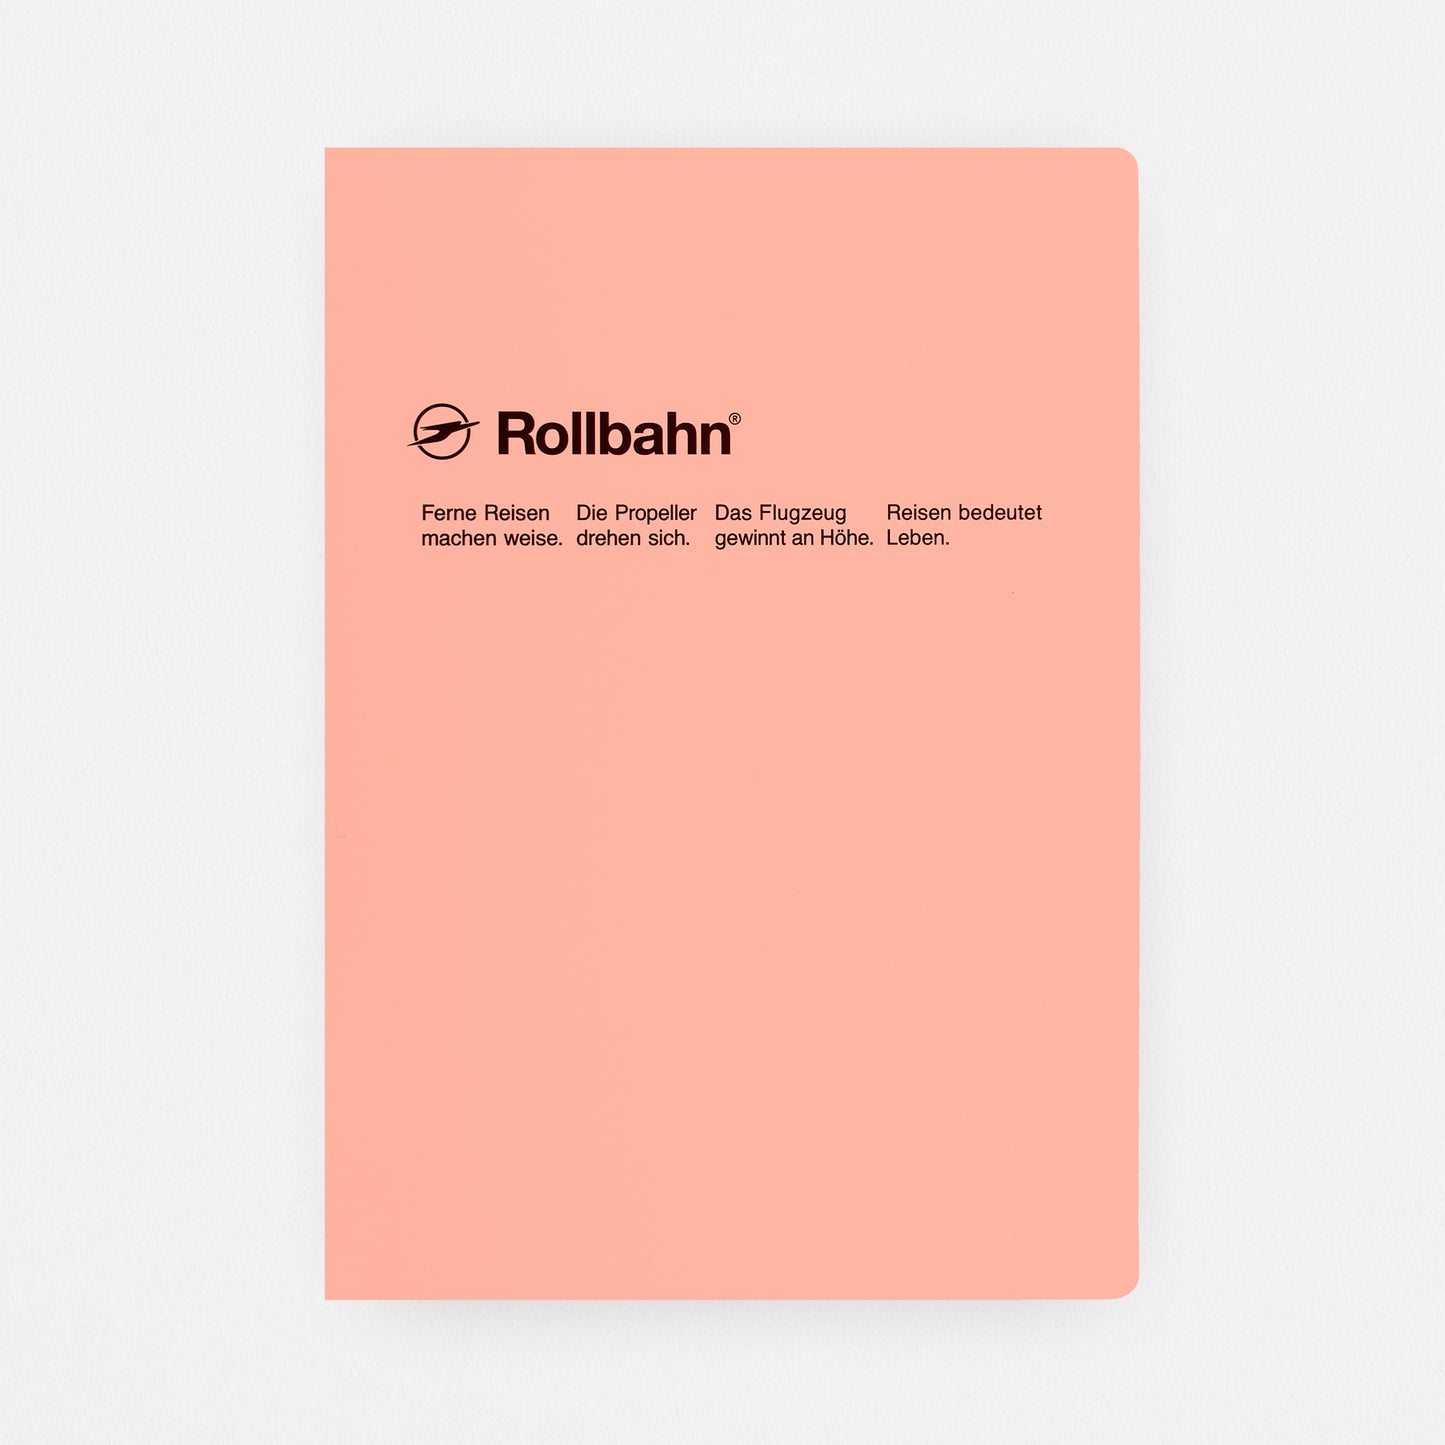 Delfonics Rollbahn "Note" Notebook Pocket, Large, A5 Or Extra Large  | 10 Colors Light Coral Pink / Pocket A6 ( 4 x 6")